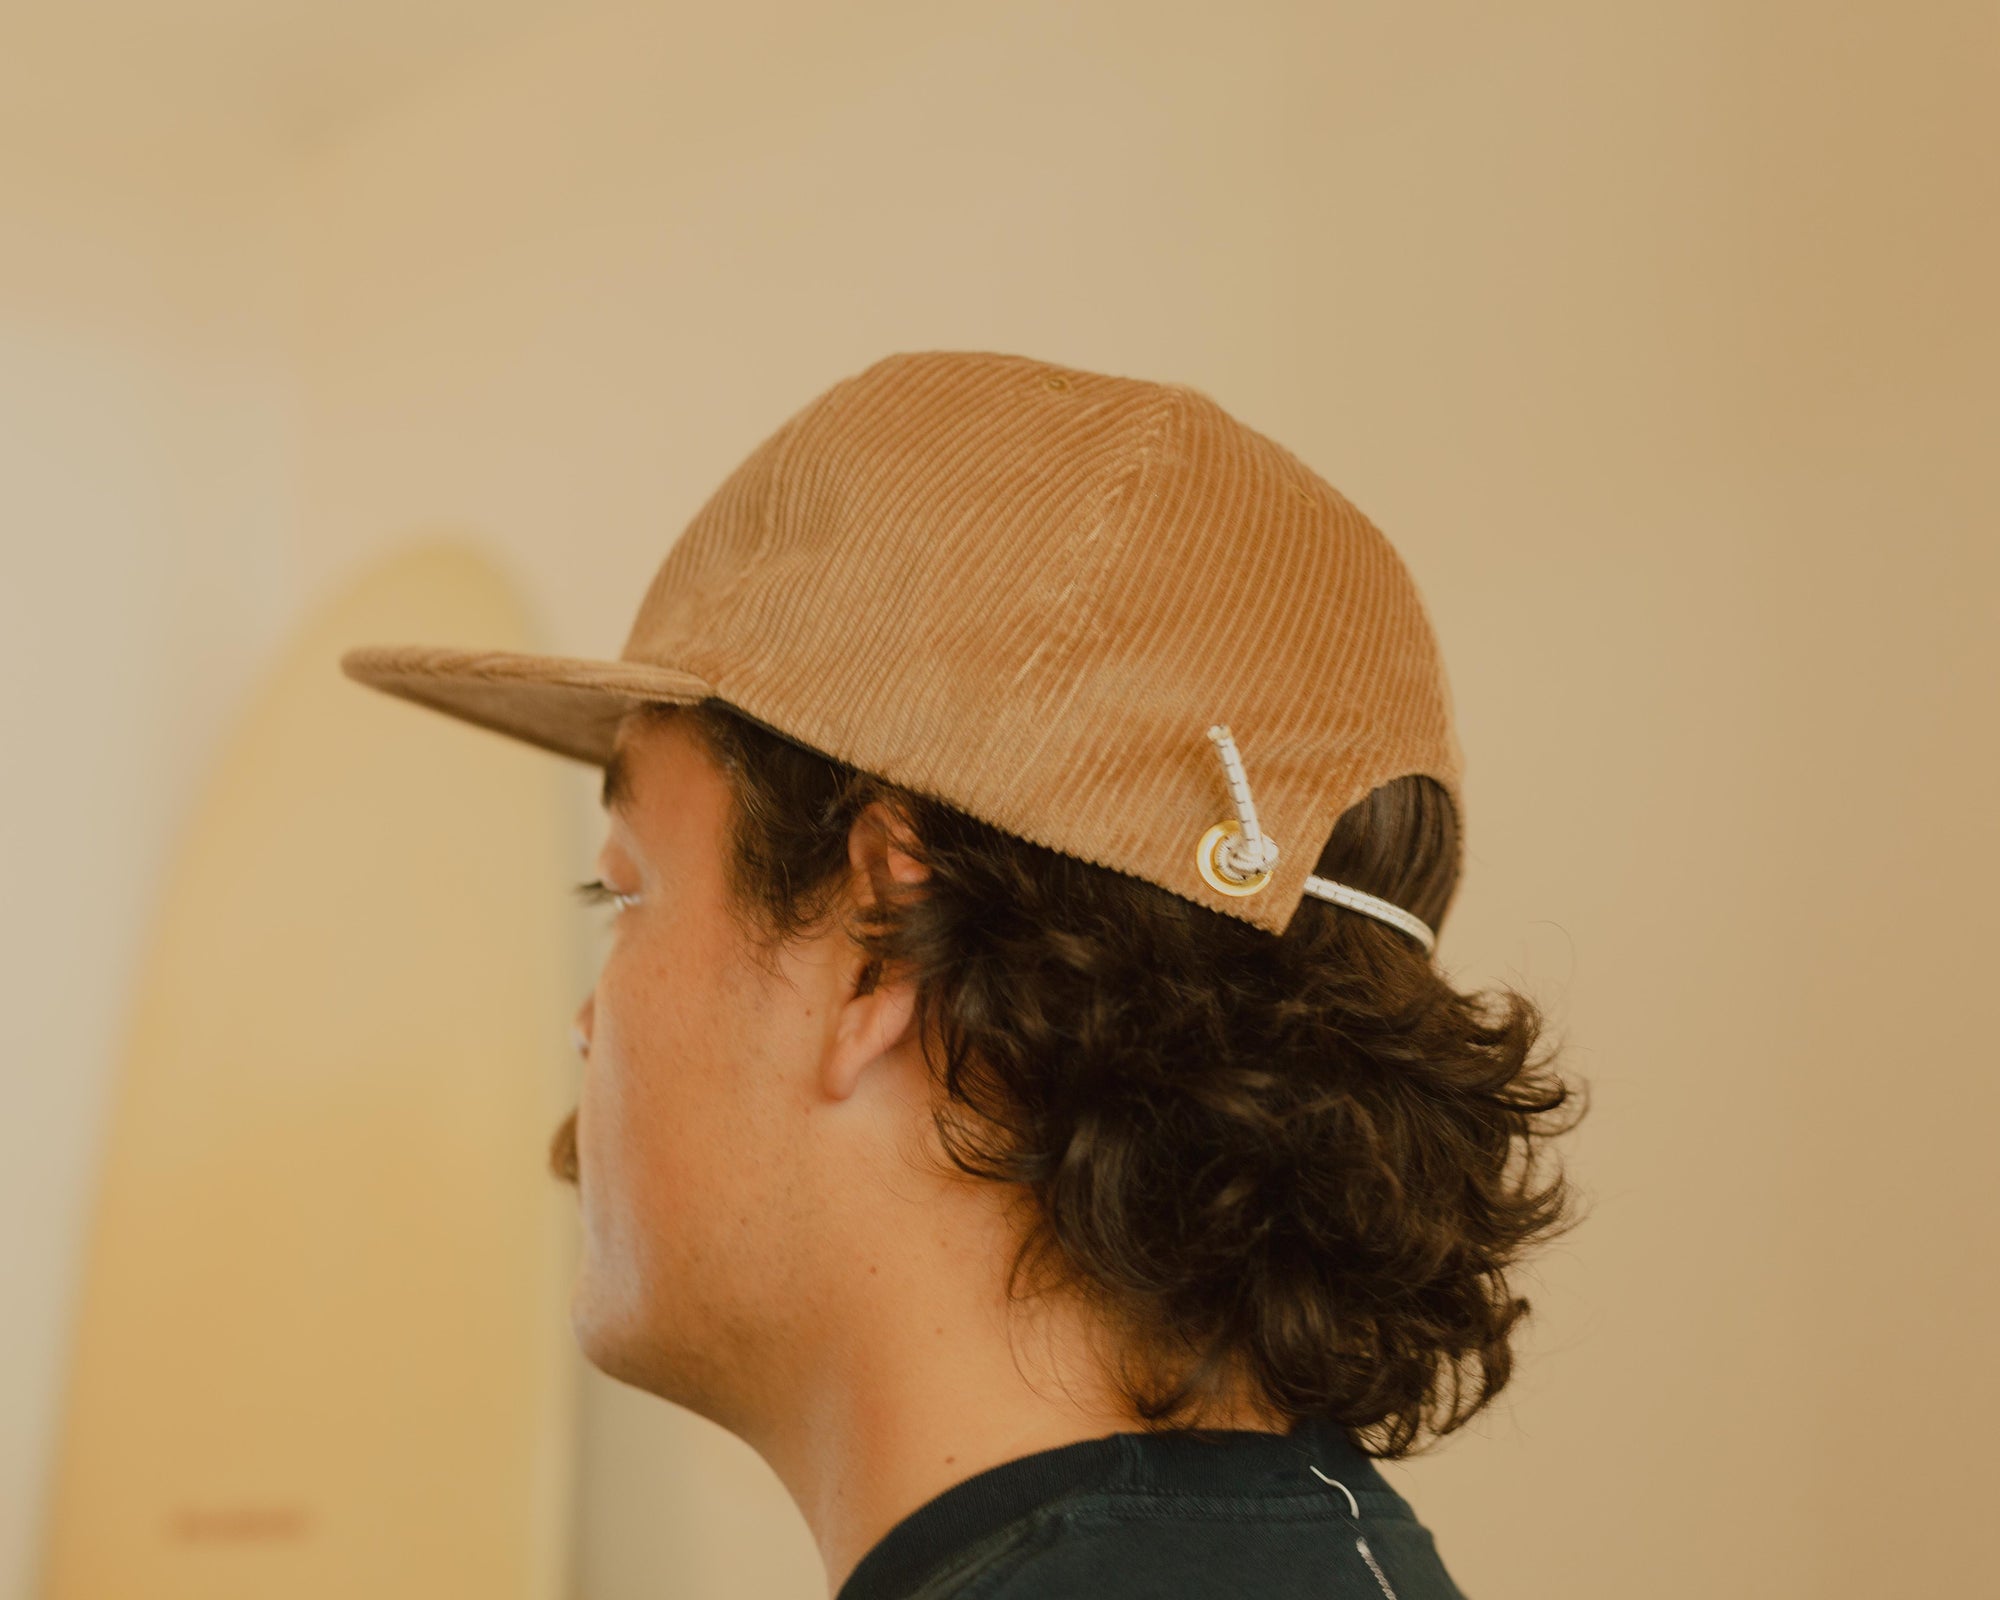 Western Hydrodynamic Research- Whale Cord Hat (Beige) side view on model